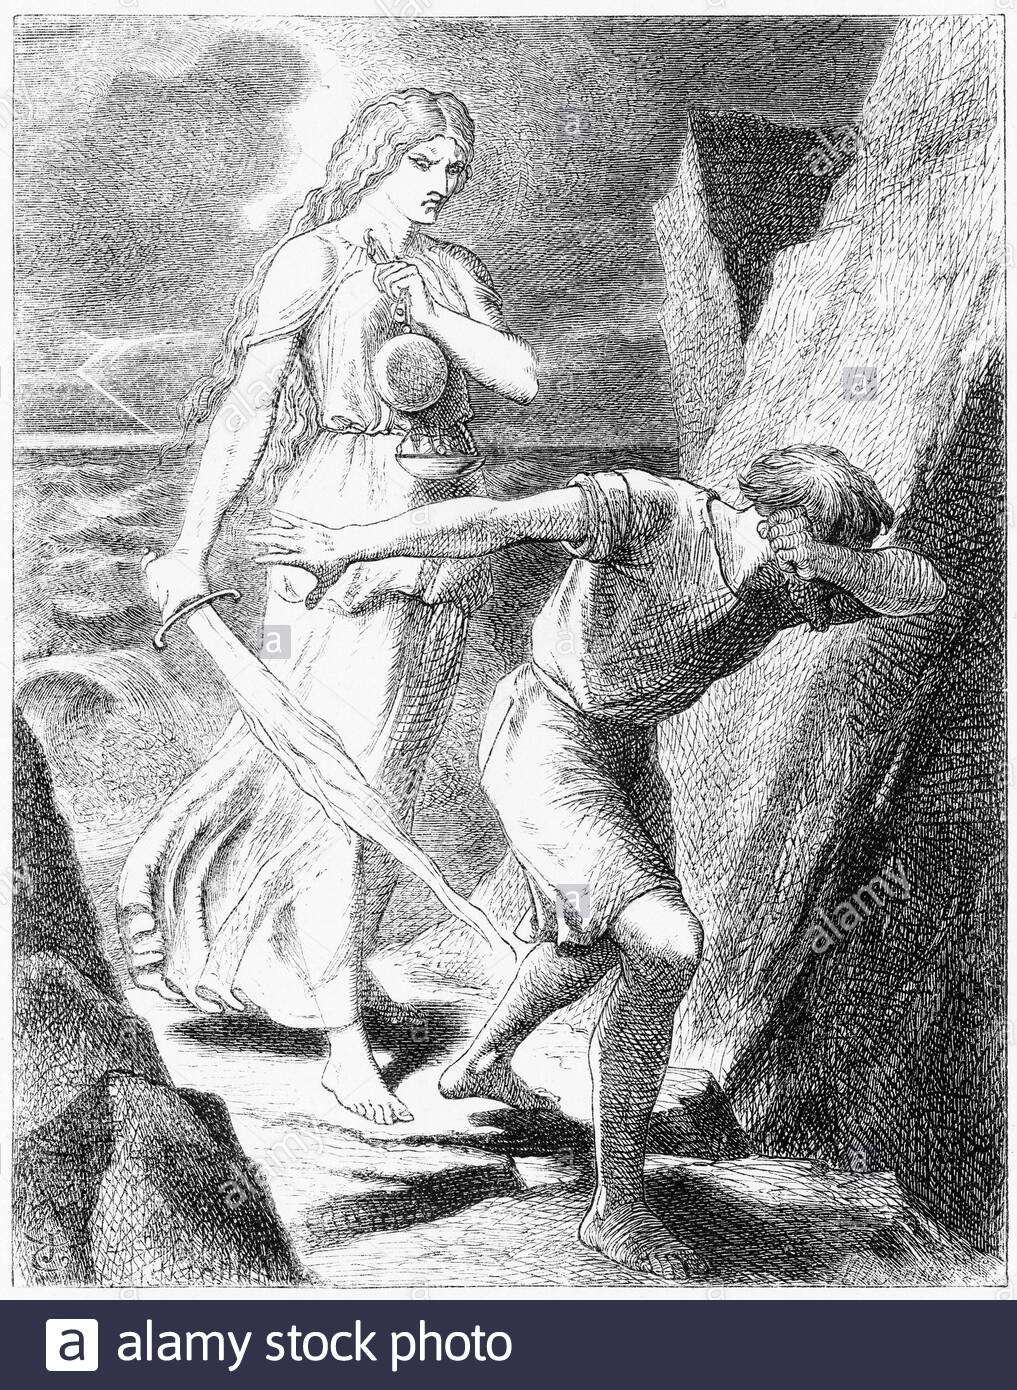 engraving-of-a-man-fleeing-from-wrath-represented-by-a-woman-with-a-flaming-sword-2AXY7BJ.jpg